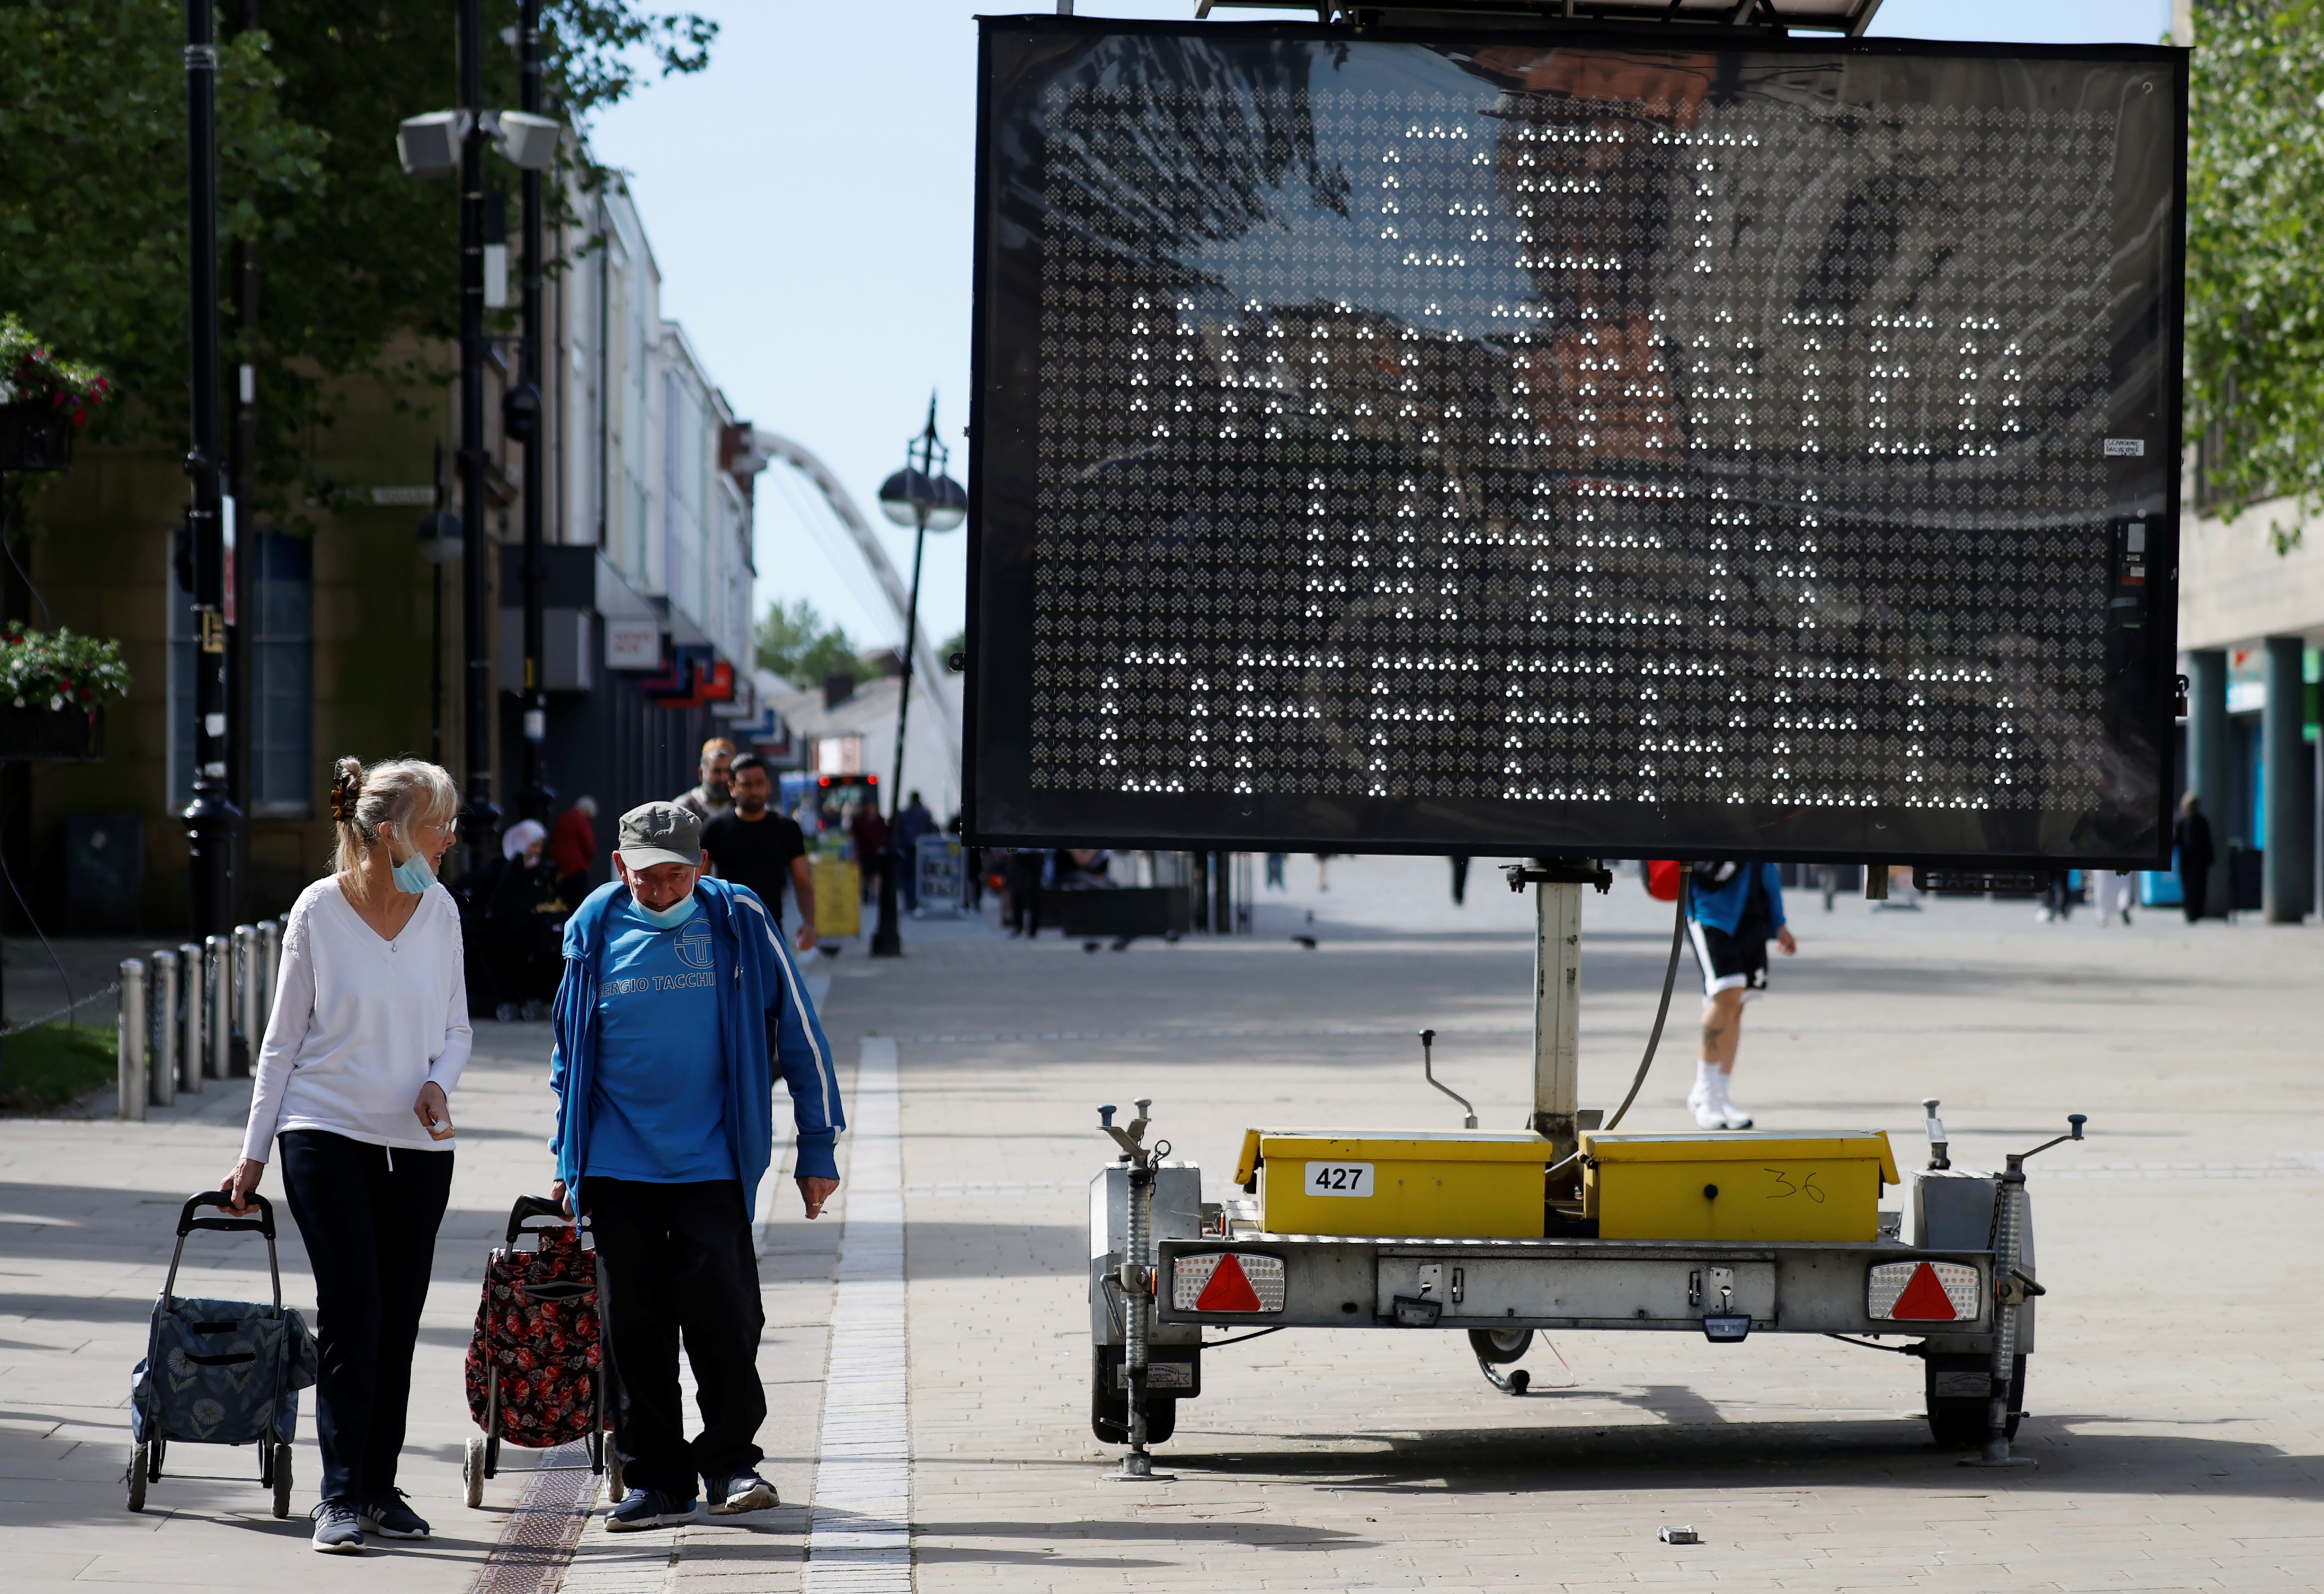 People pull shopping carts as they walk past an information board, amid the outbreak of the coronavirus disease (COVID-19), in Bolton, Britain, June 16, 2021. REUTERS/Phil Noble